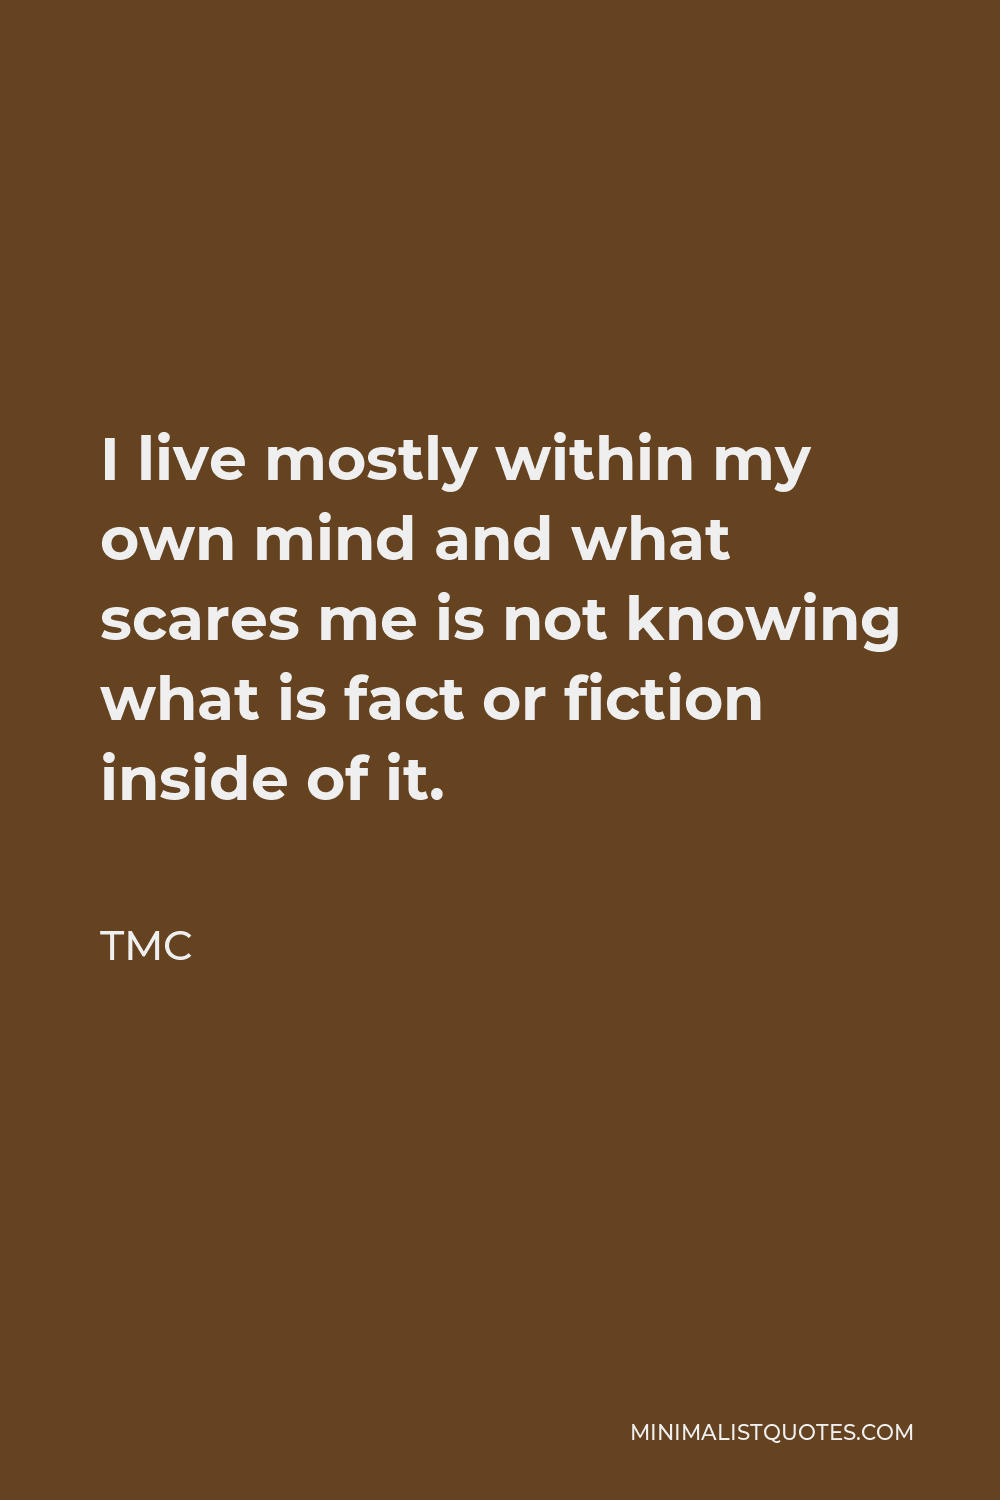 TMC Quote - I live mostly within my own mind and what scares me is not knowing what is fact or fiction inside of it.